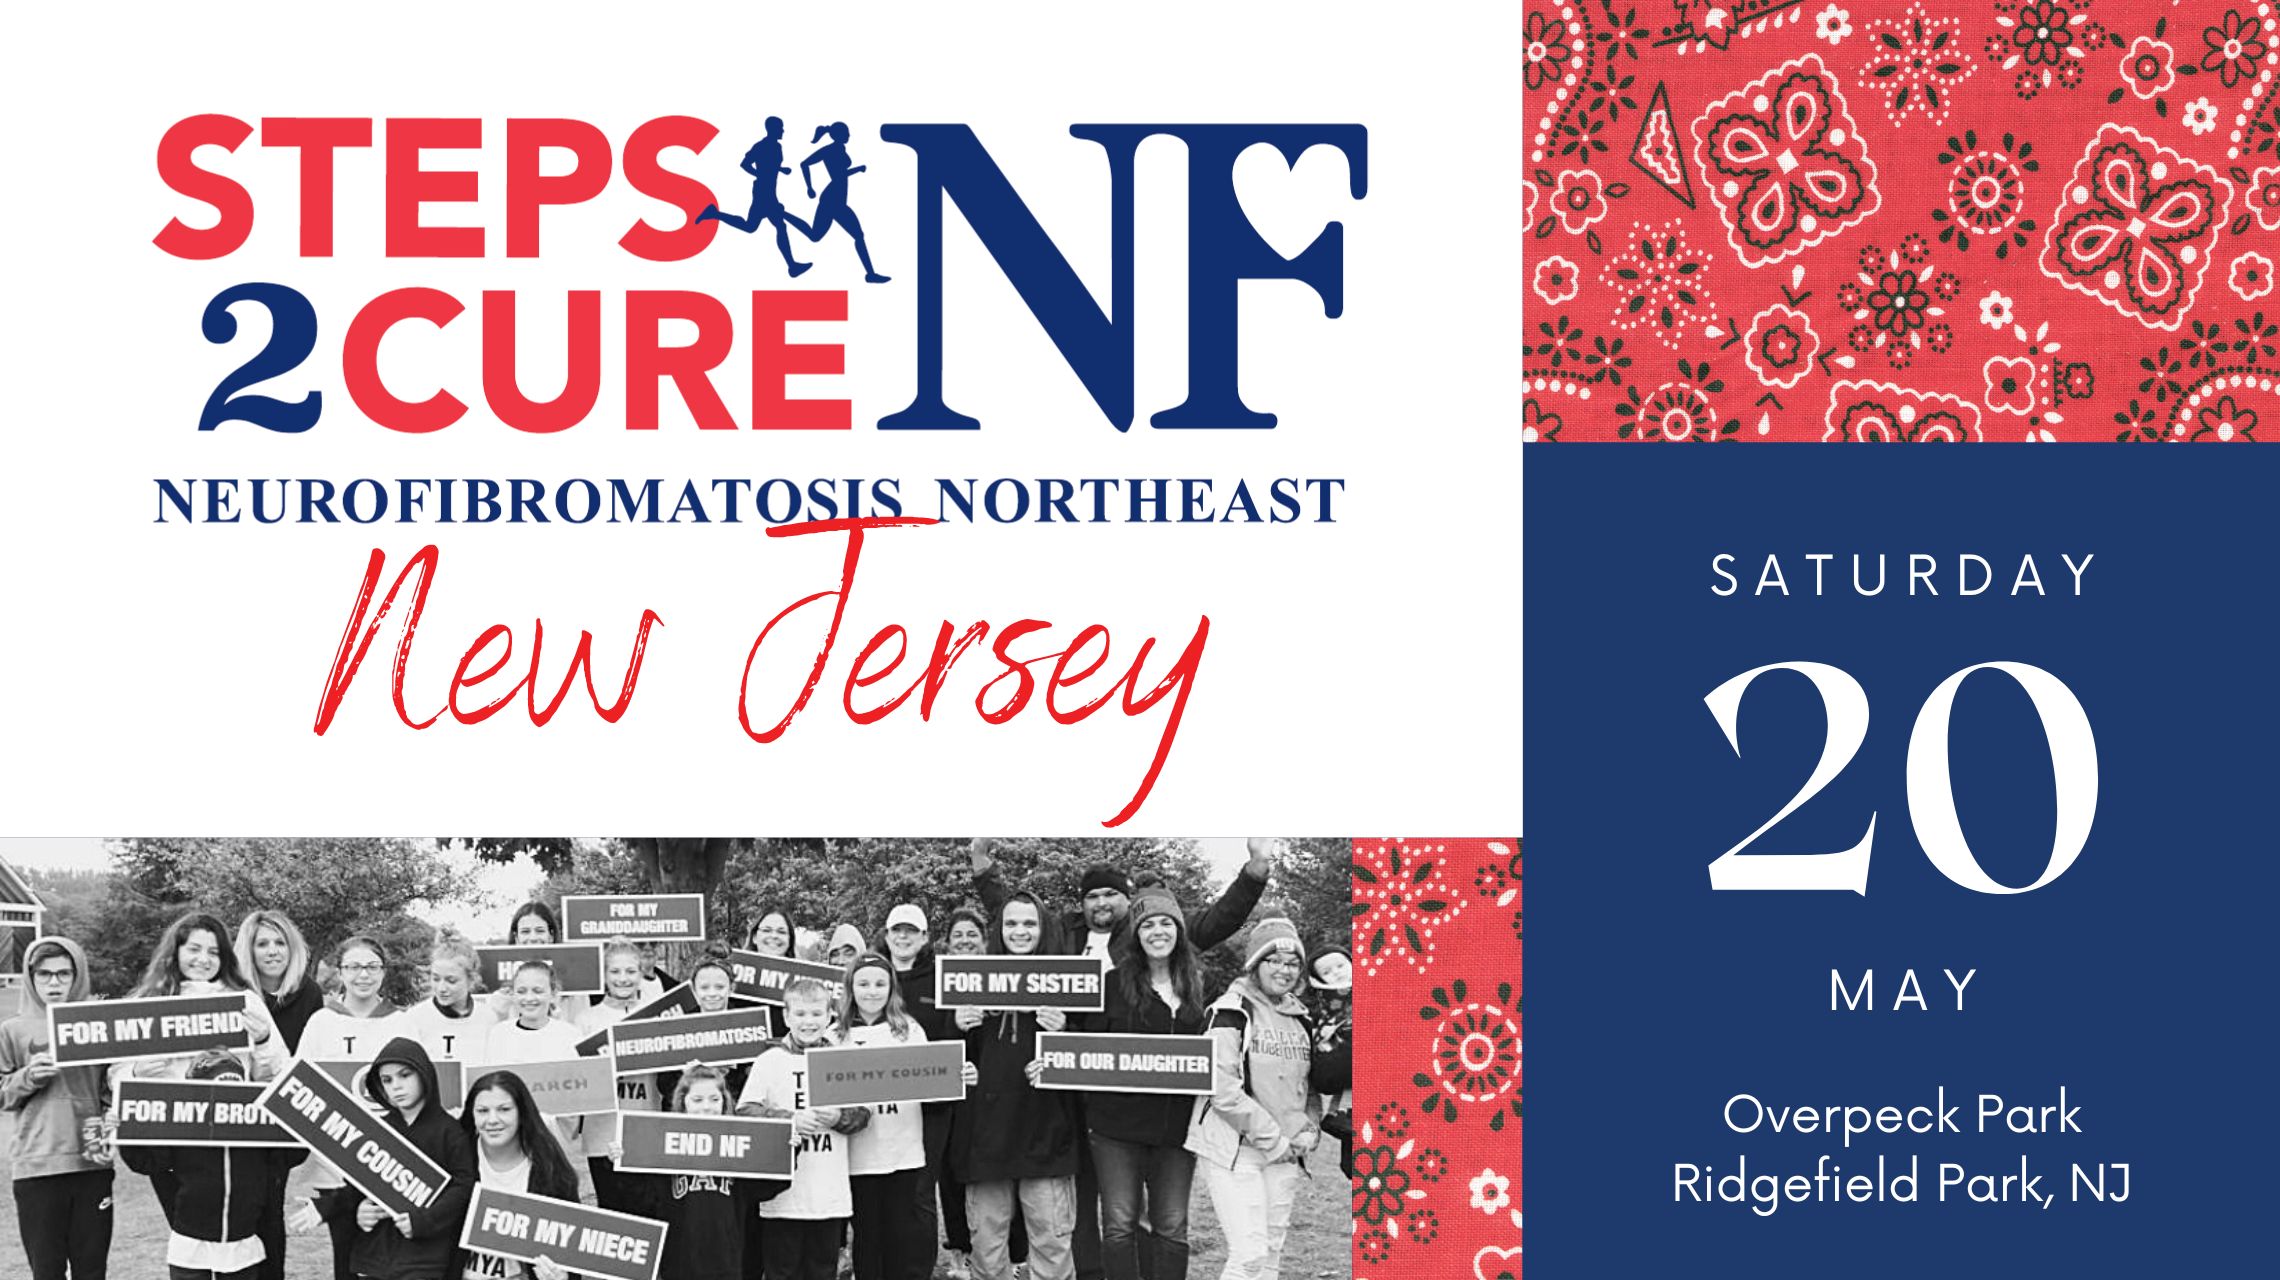 NJ Steps2Cure NF featured image